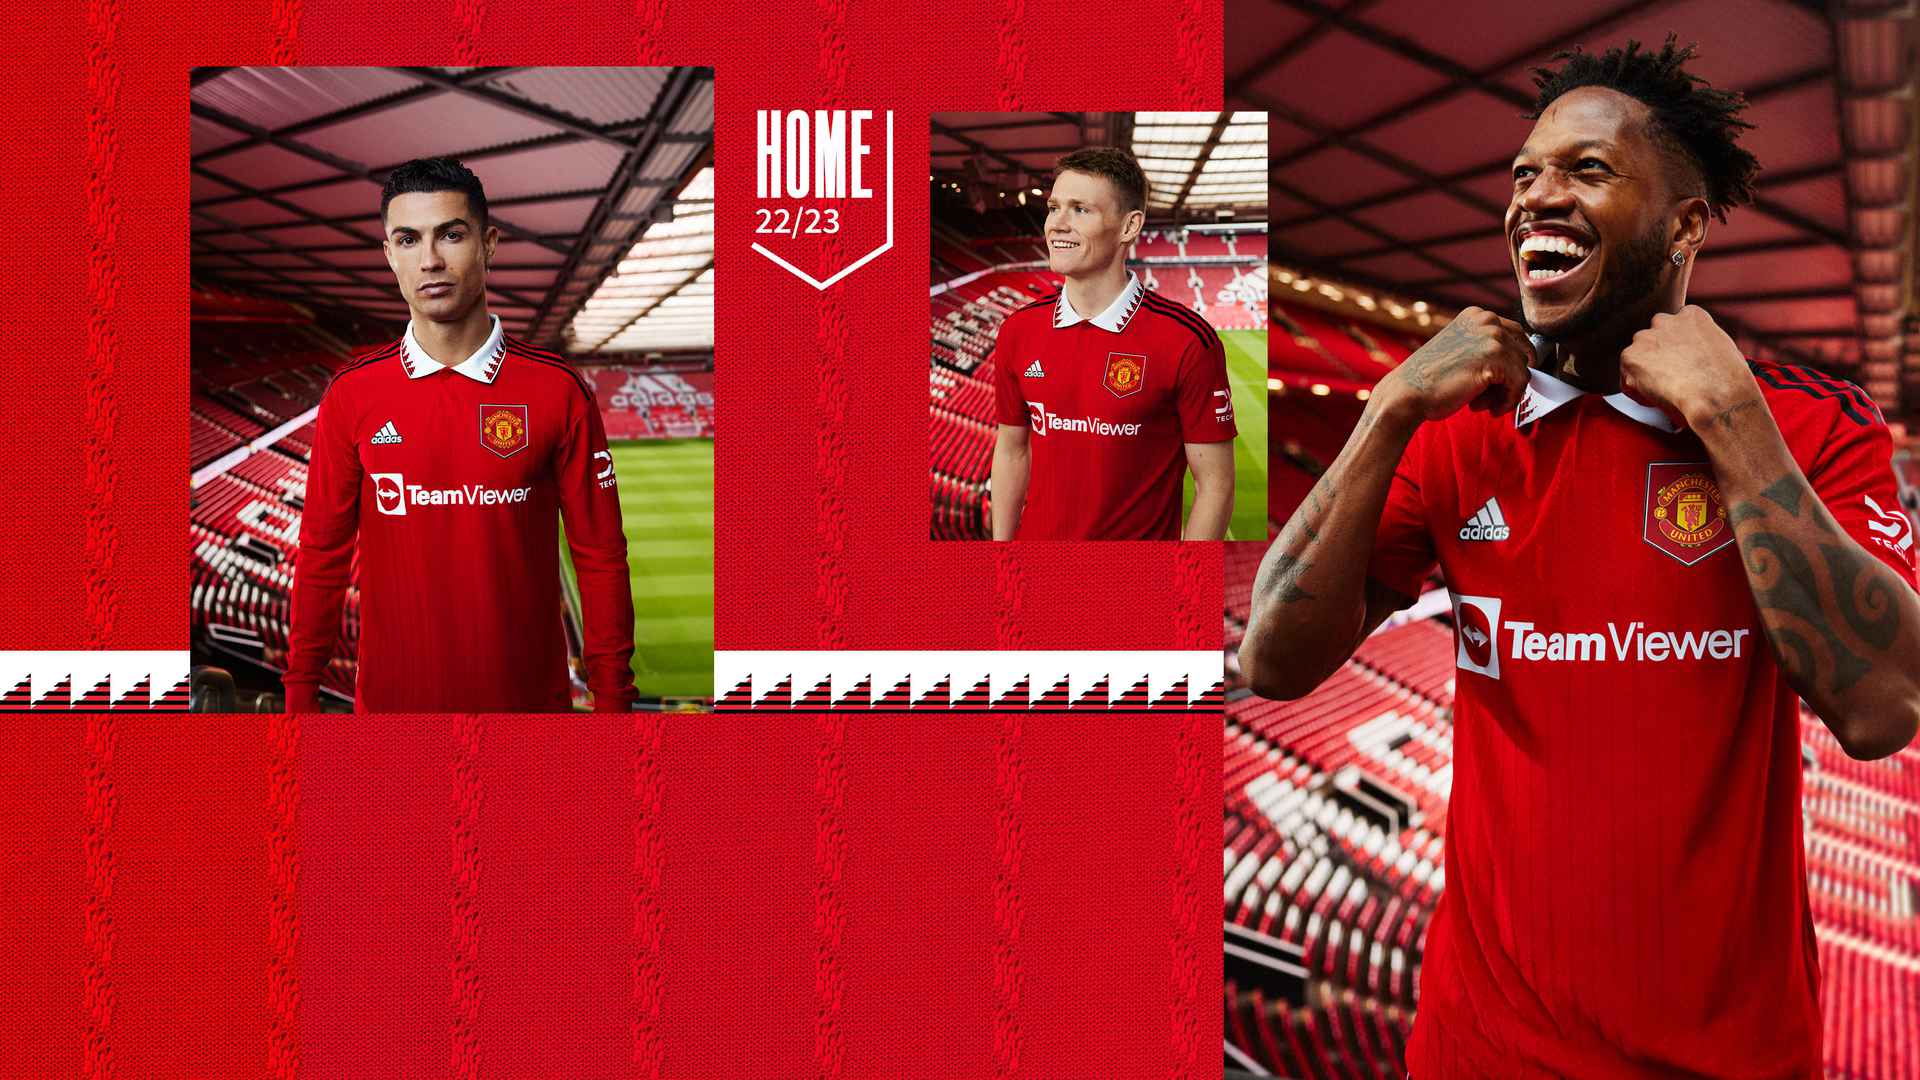 Man Utd And Adidas Launch New Home Kit For 2022 23 Season